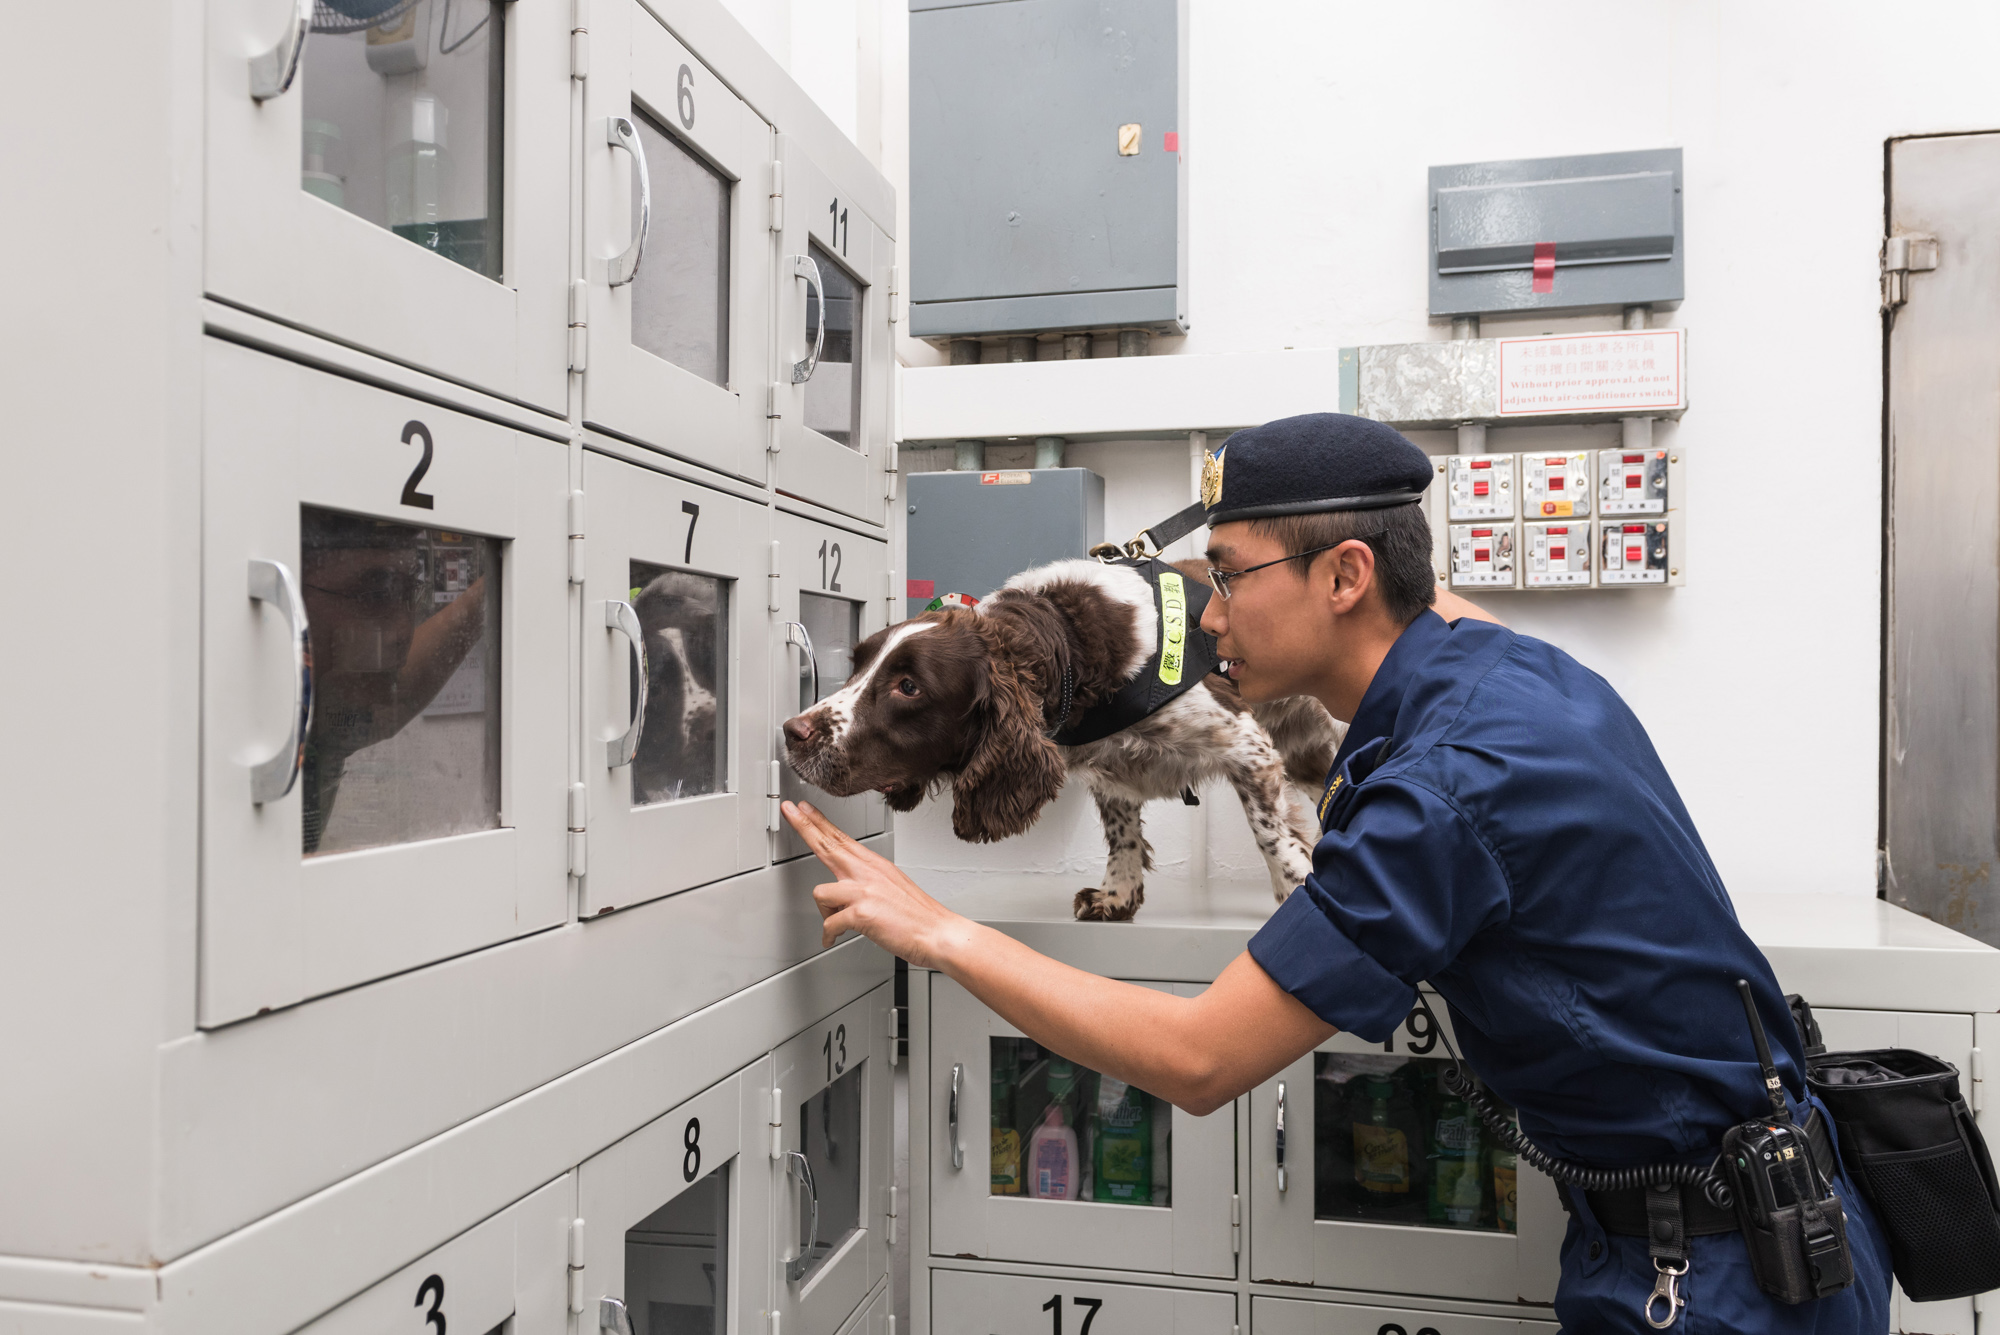 Canines carry out search duties to support the surveillance in correctional facilities.